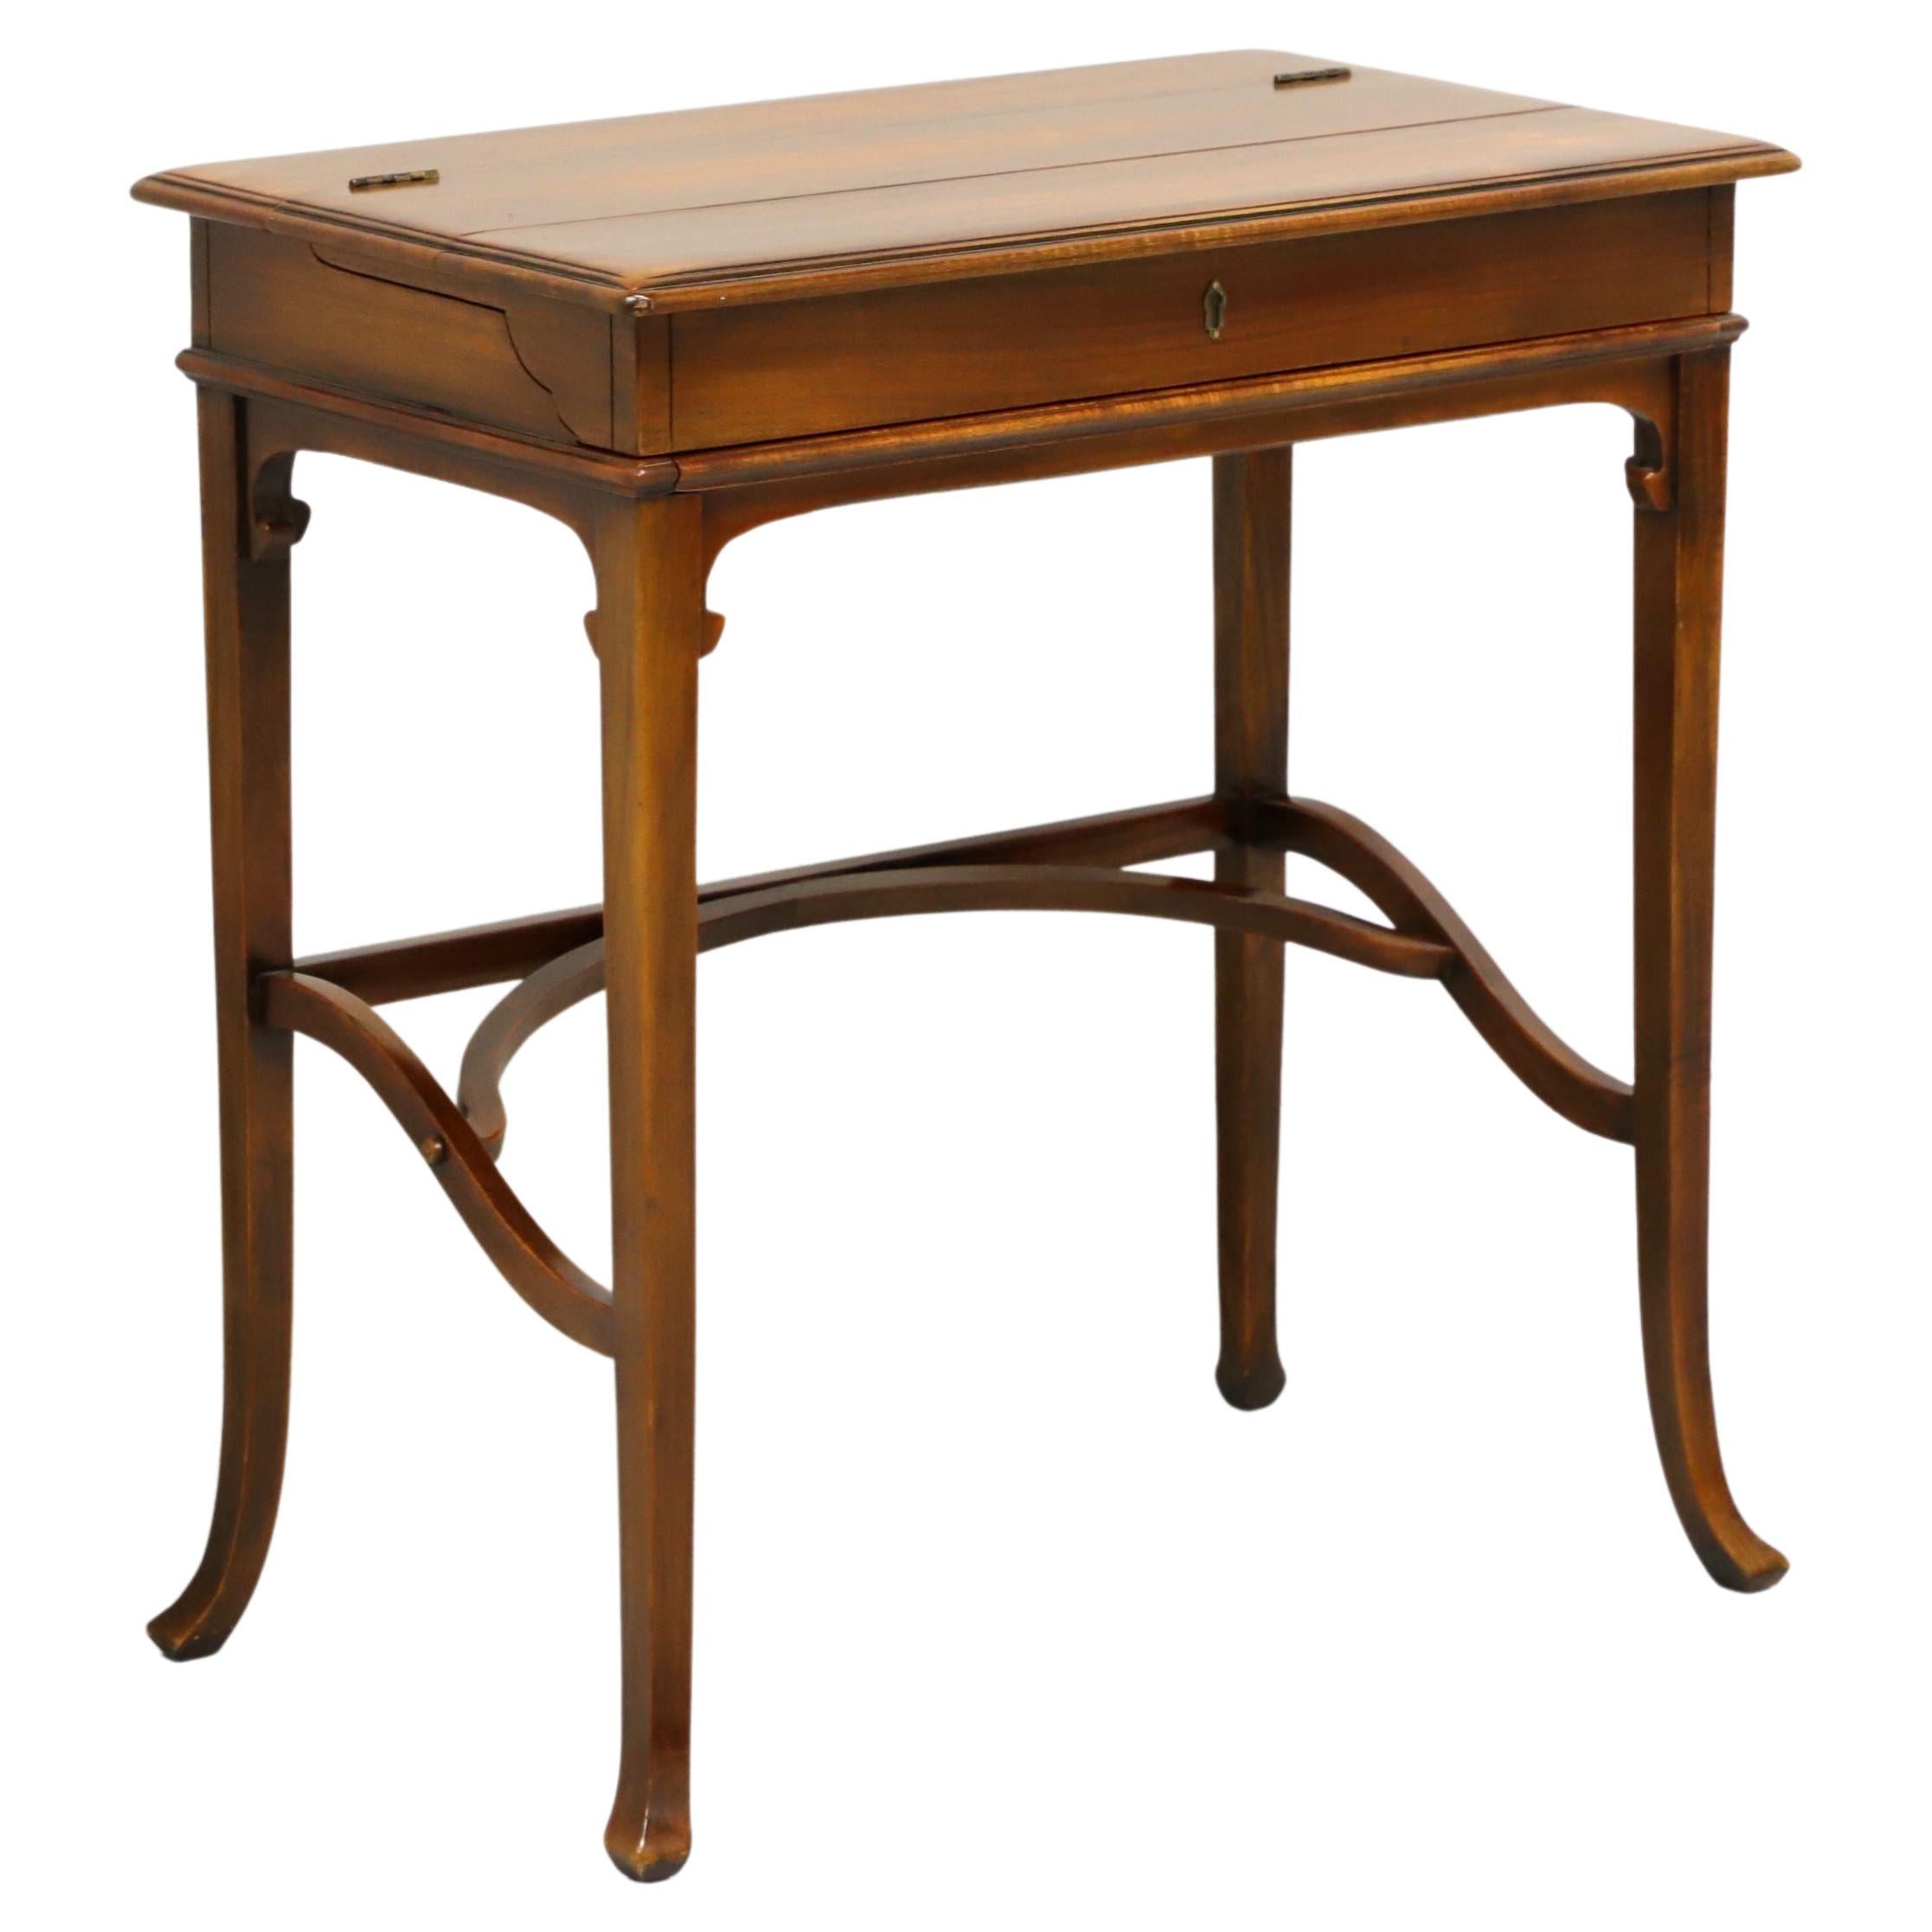 BAKER Petite Victorian Style Campaign Writing Desk